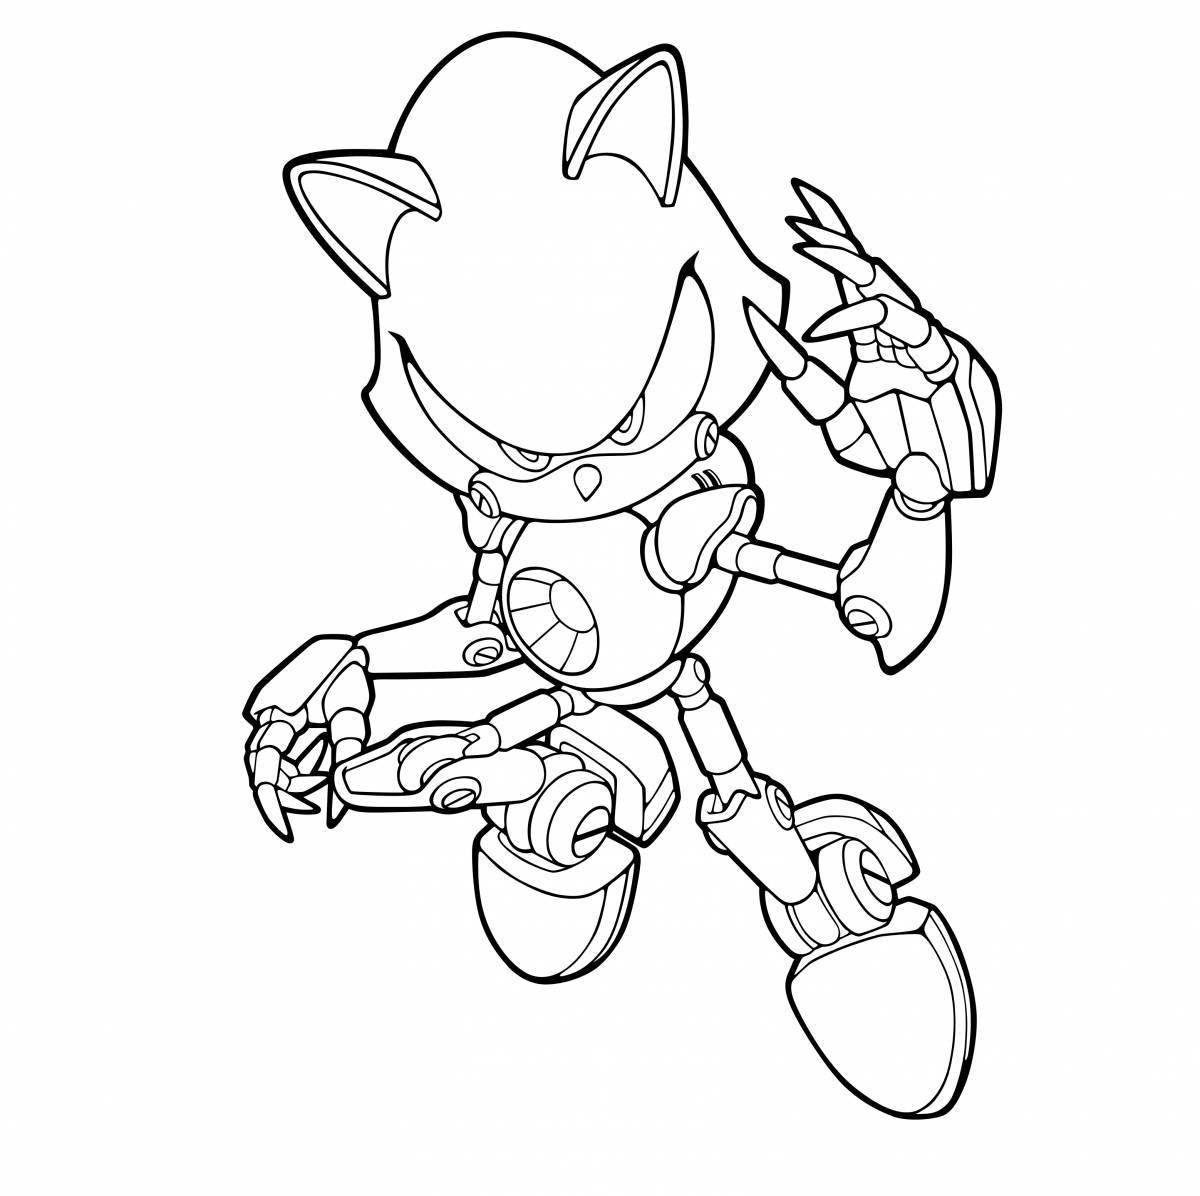 Fun sonic infinity coloring page